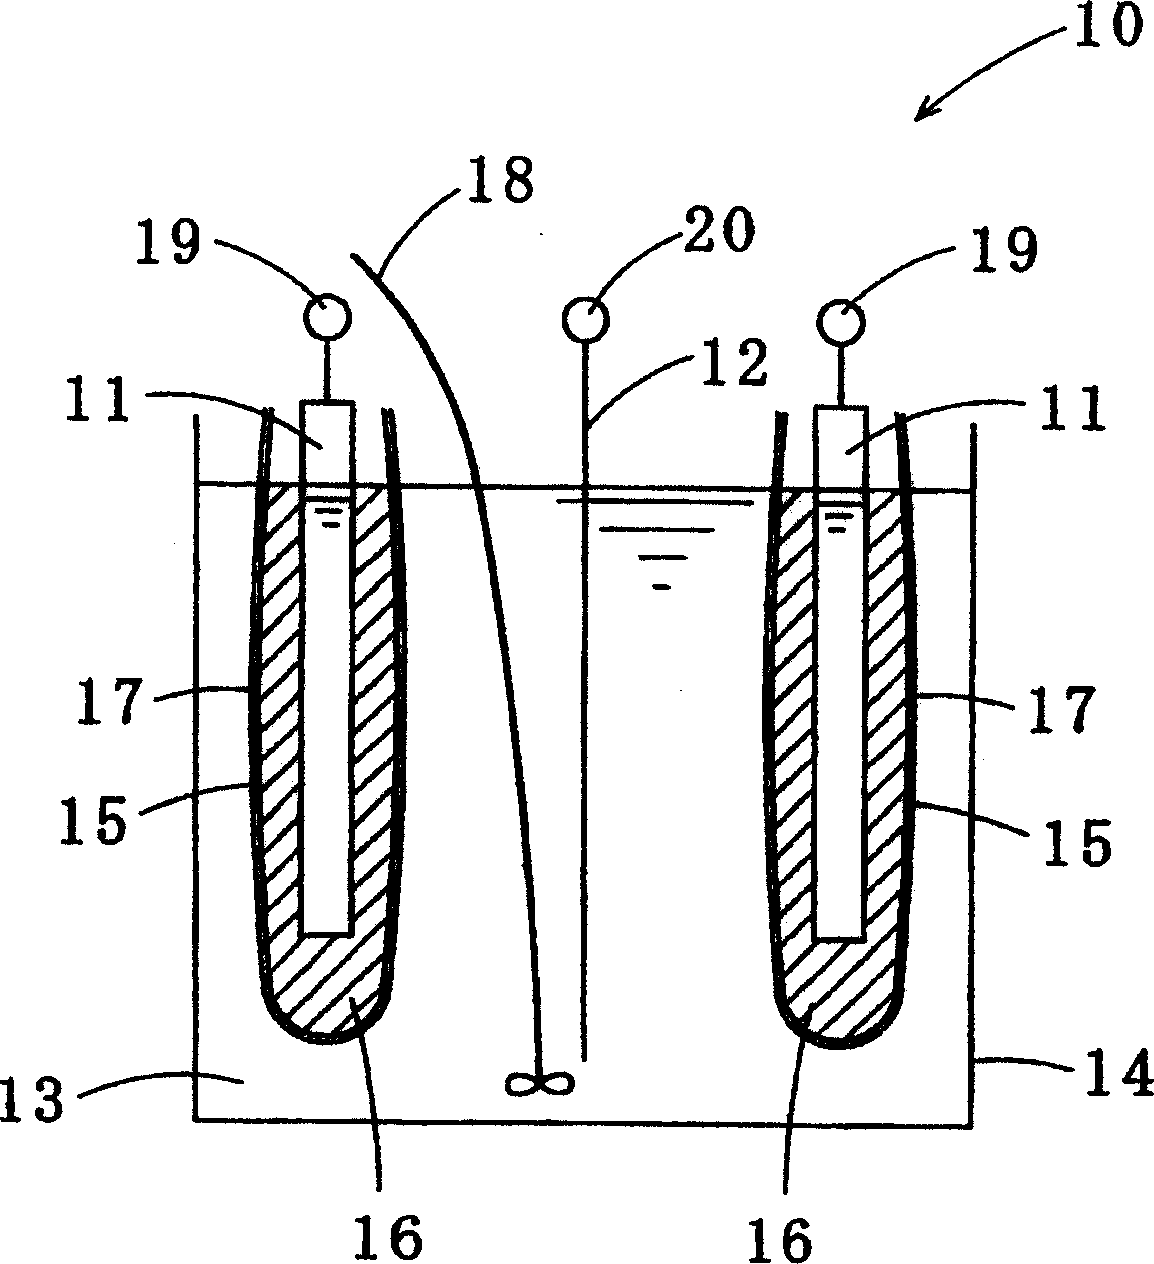 Tin-silver-copper plating solution, plating film containing the same, and method for forming the plating film